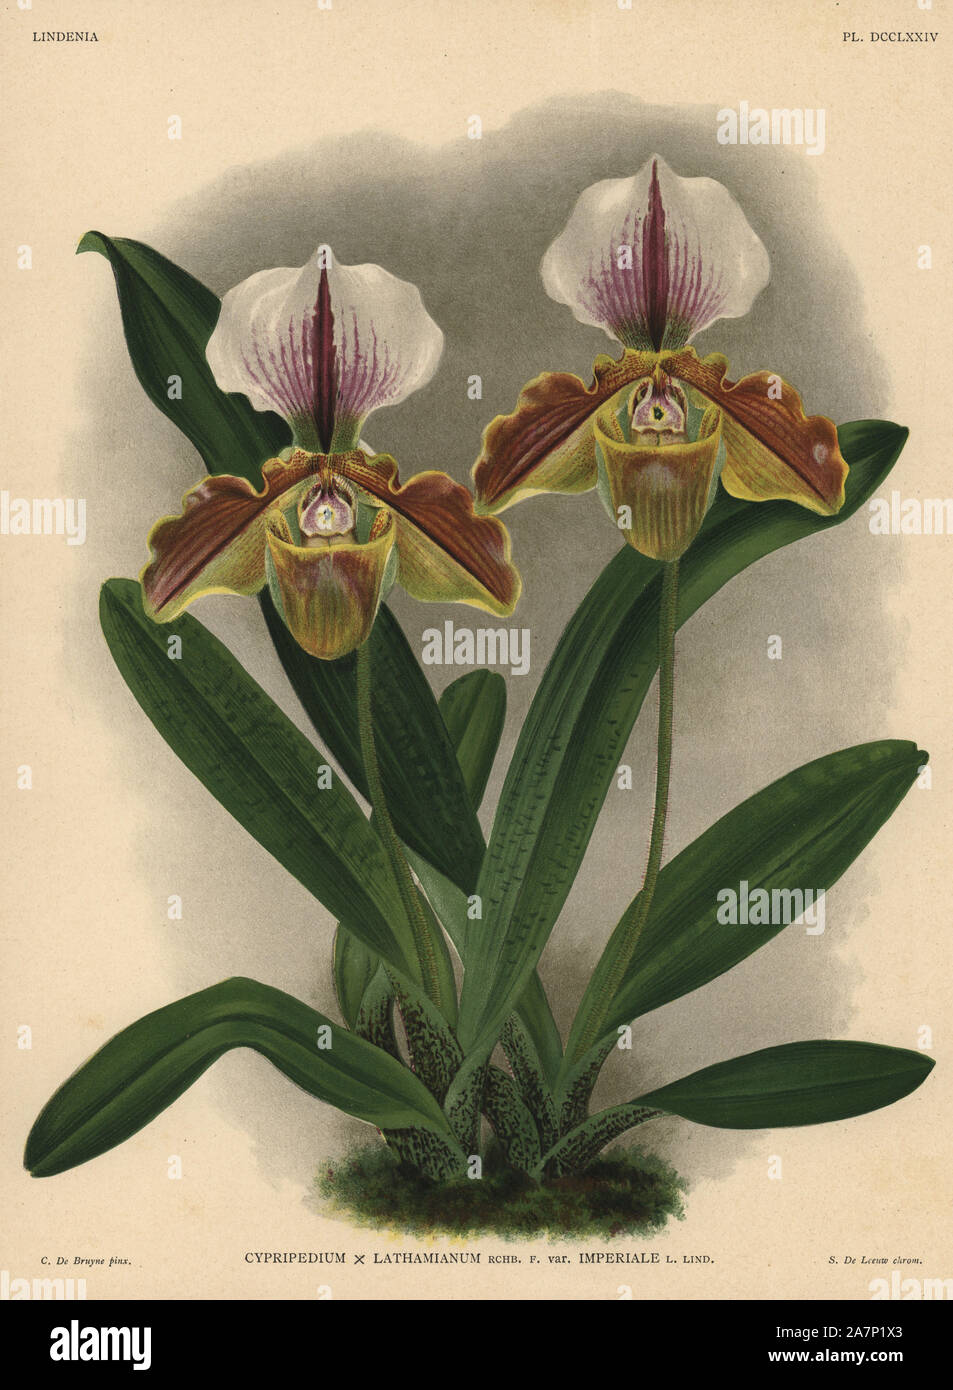 Imperiale variety of Cypripedium x Lathamianum hybrid orchid. Illustration drawn by C. de Bruyne and chromolithographed by S. de Leeuw from Lucien Linden's 'Lindenia, Iconographie des Orchidees,' Brussels, 1902. Stock Photo